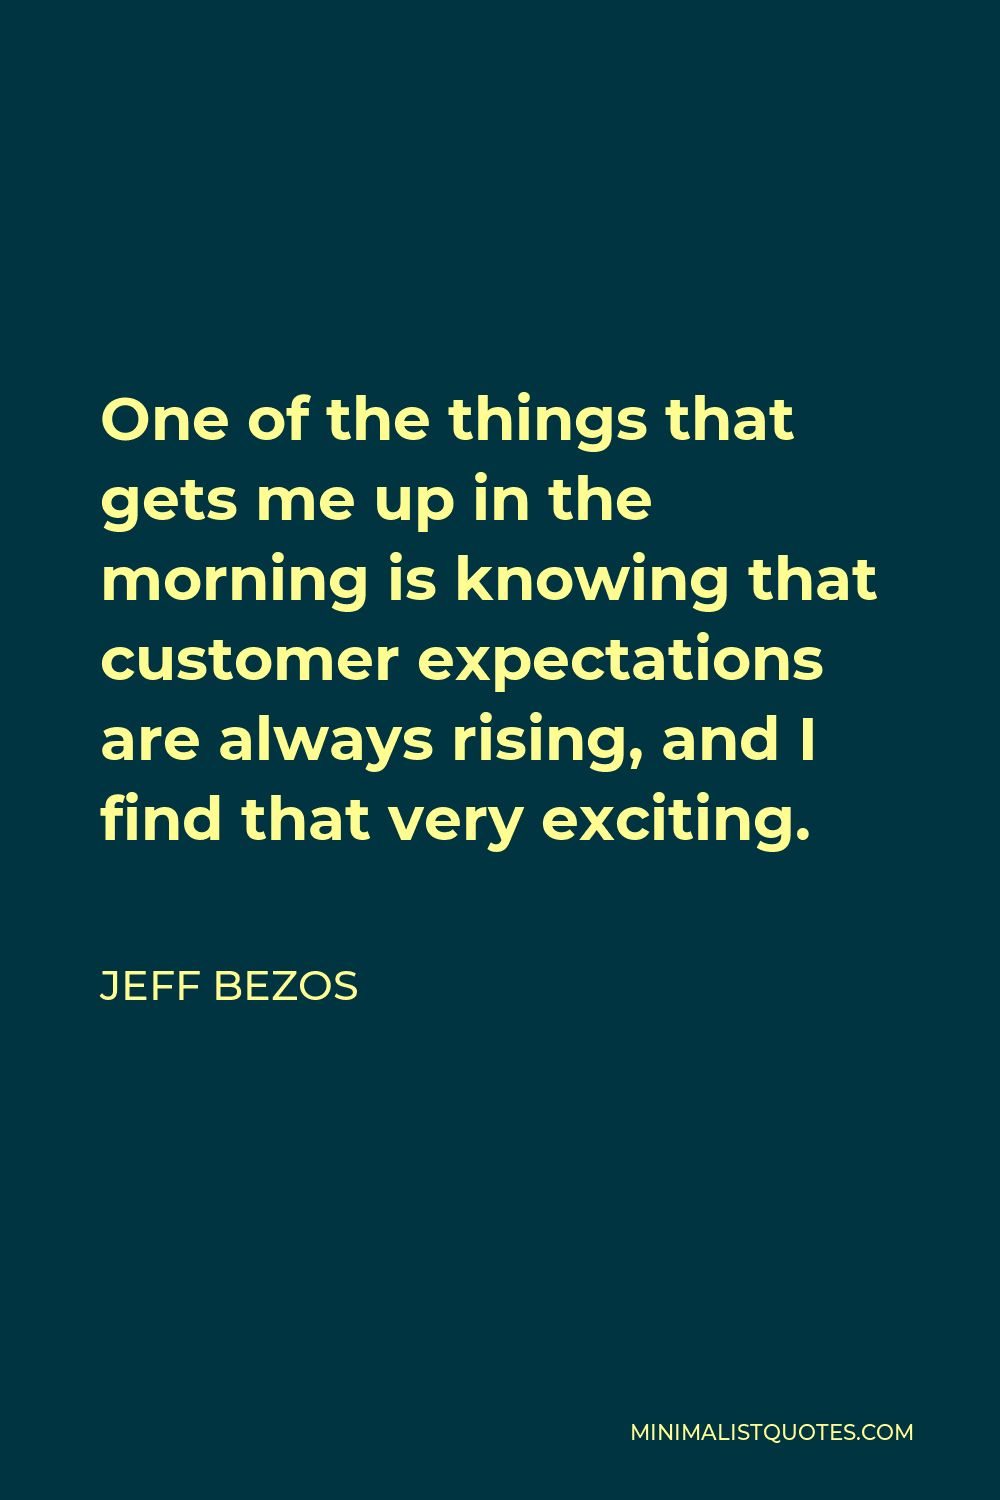 Jeff Bezos Quote - One of the things that gets me up in the morning is knowing that customer expectations are always rising, and I find that very exciting.